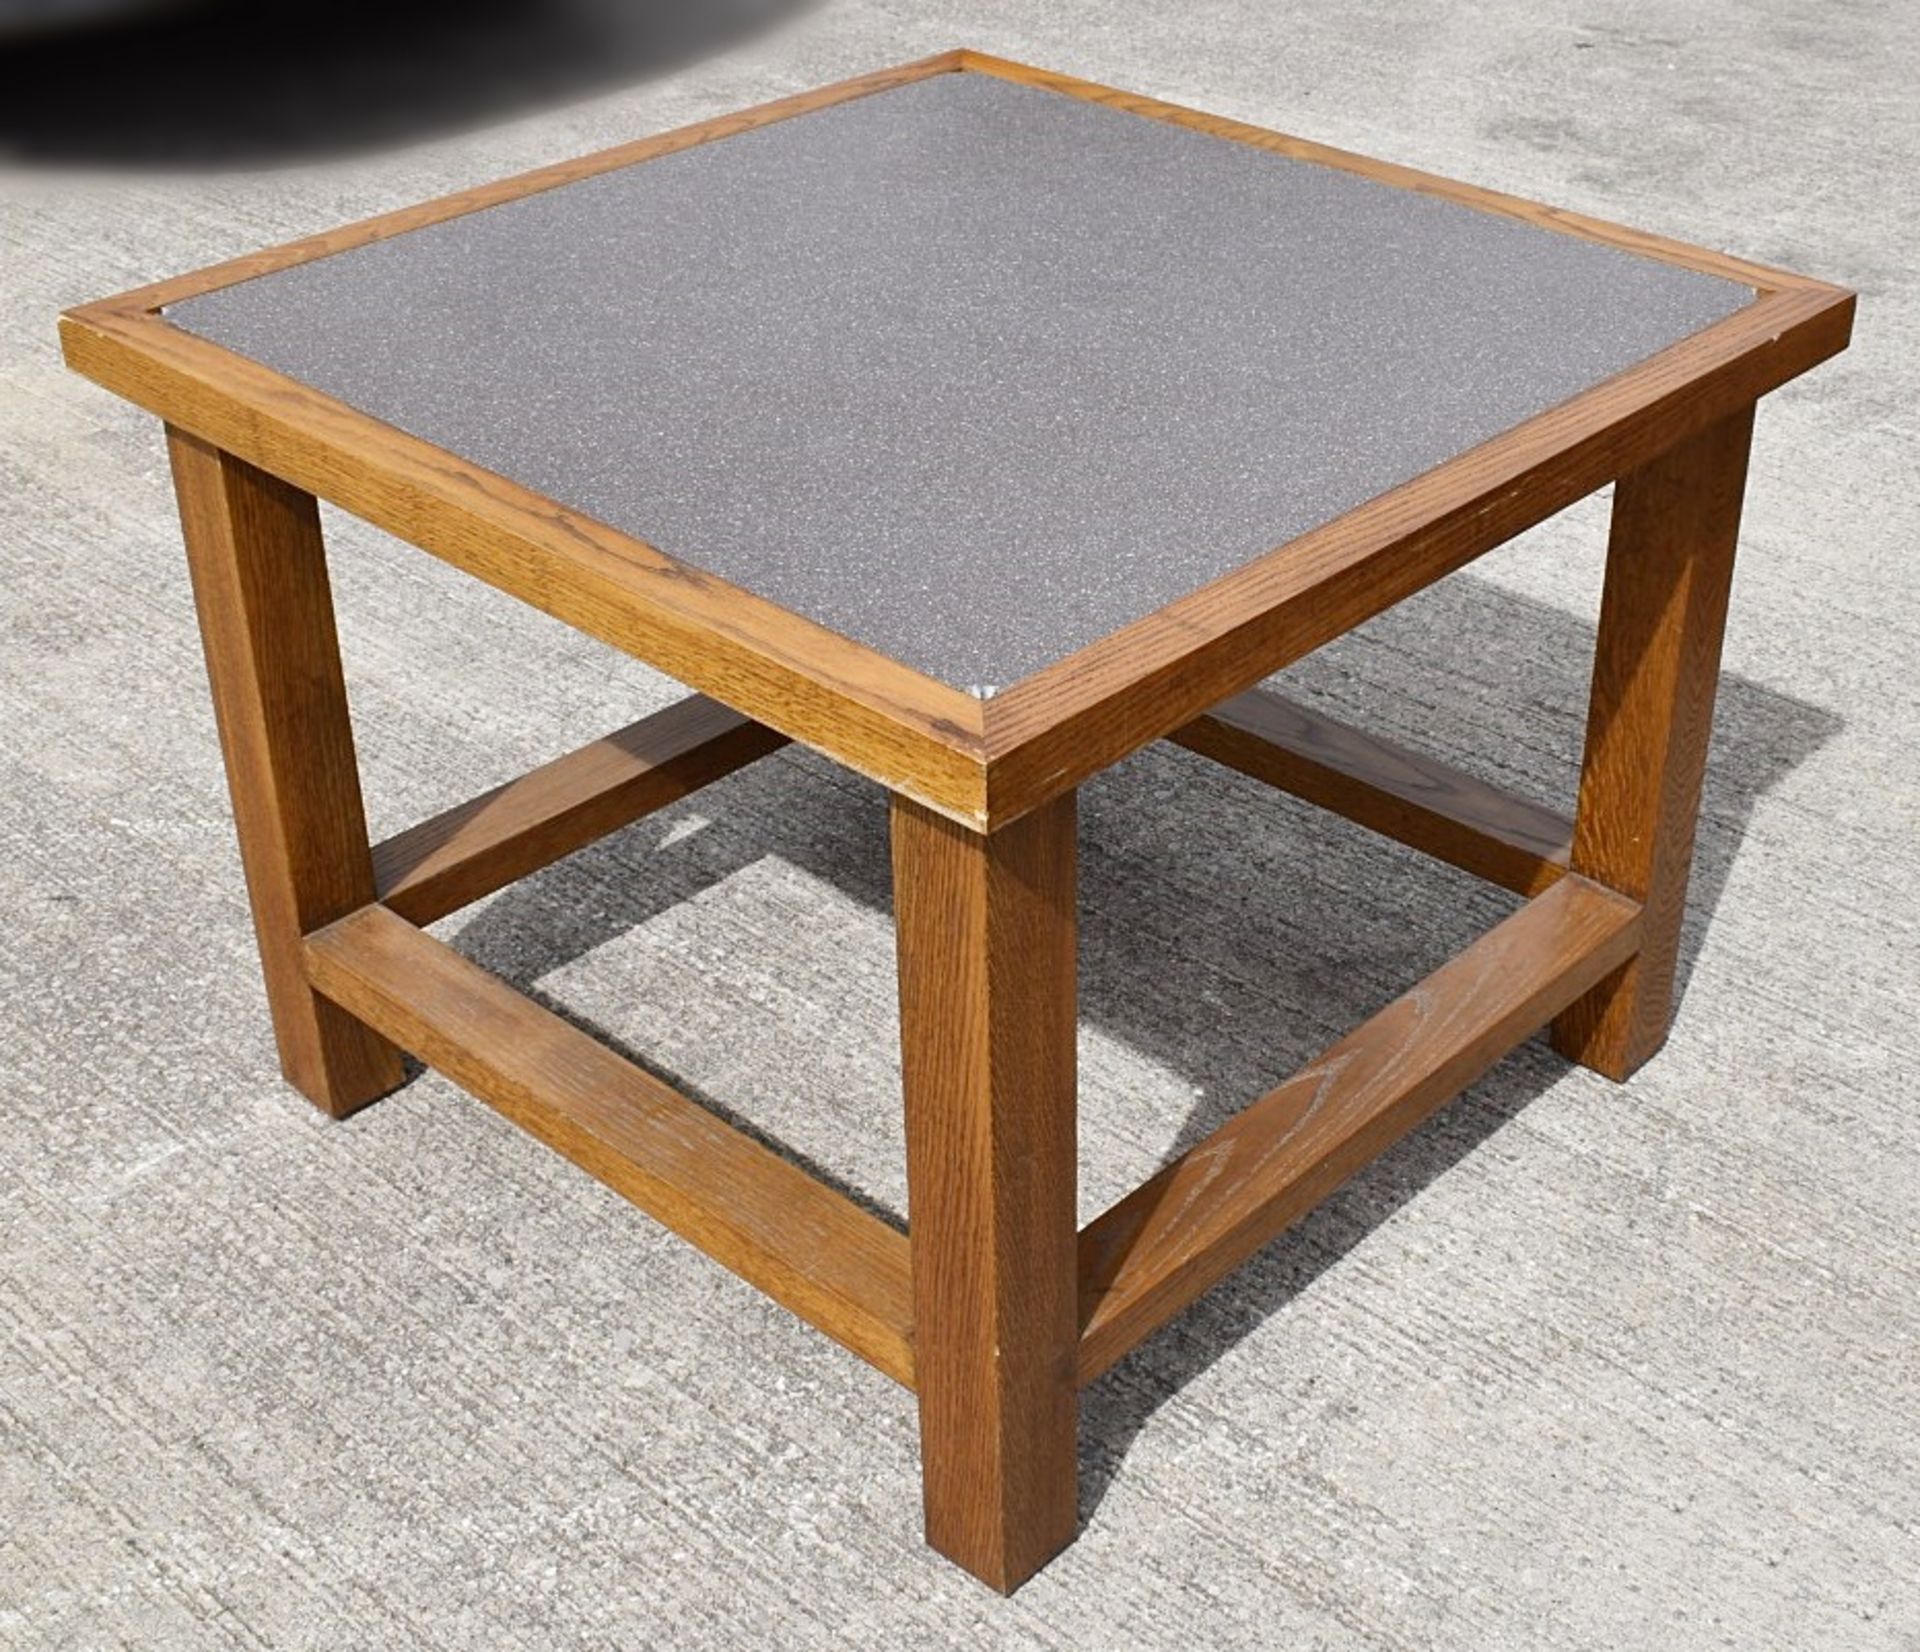 1 x Large Solid Wood Shop Retail Display Table With Stone Inlaid Top - Image 2 of 7